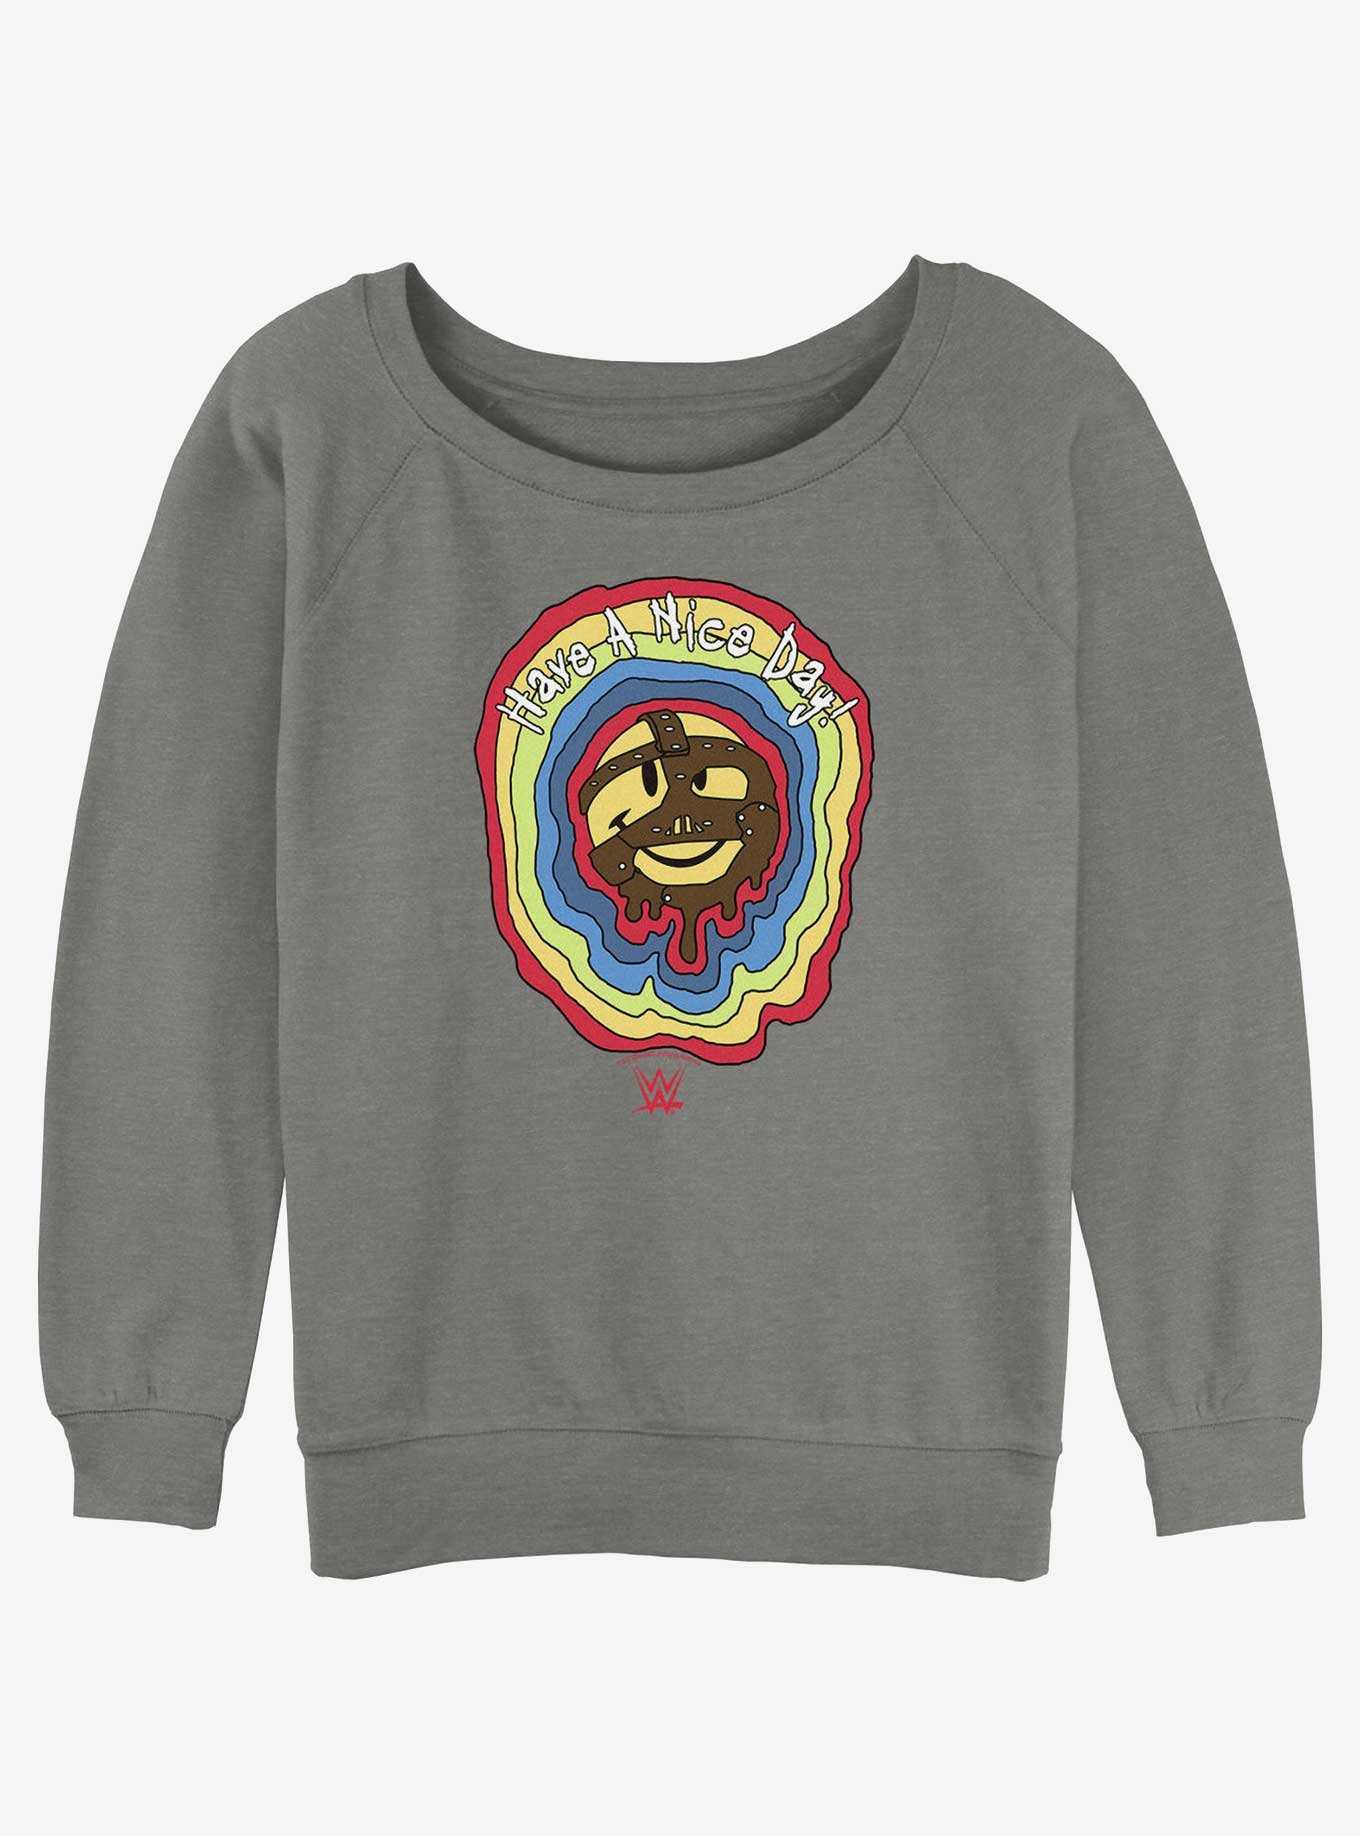 WWE Mick Foley Mankind Have A Nice Day! Girls Slouchy Sweatshirt, , hi-res